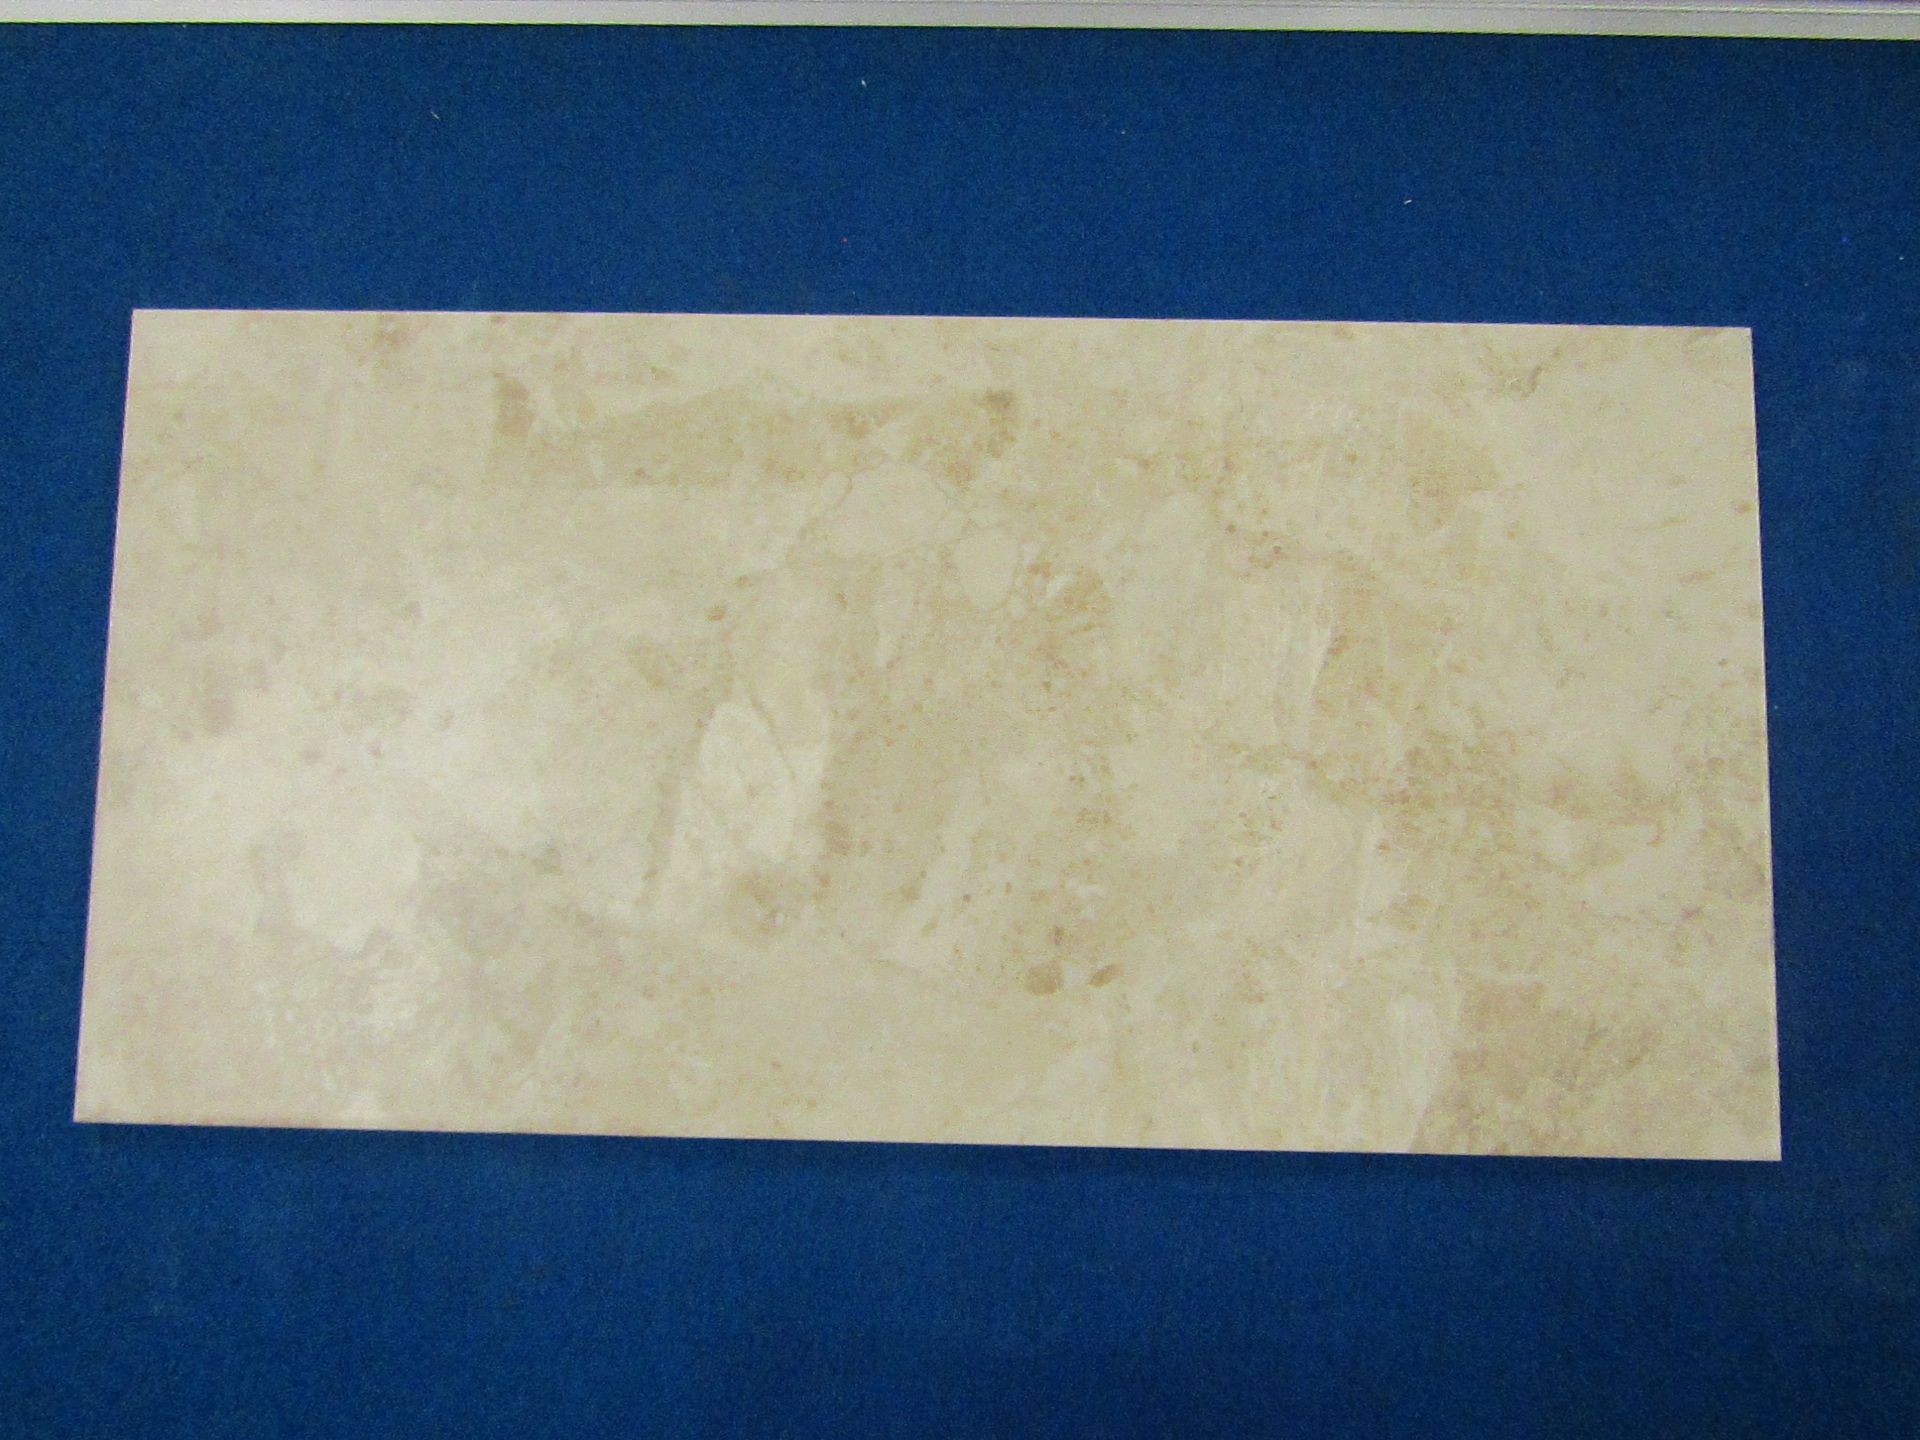 Pallet of 40x Packs of 5 Breccia Beige Honed 300x600 wall and Floor Tiles By Johnsons, New, the